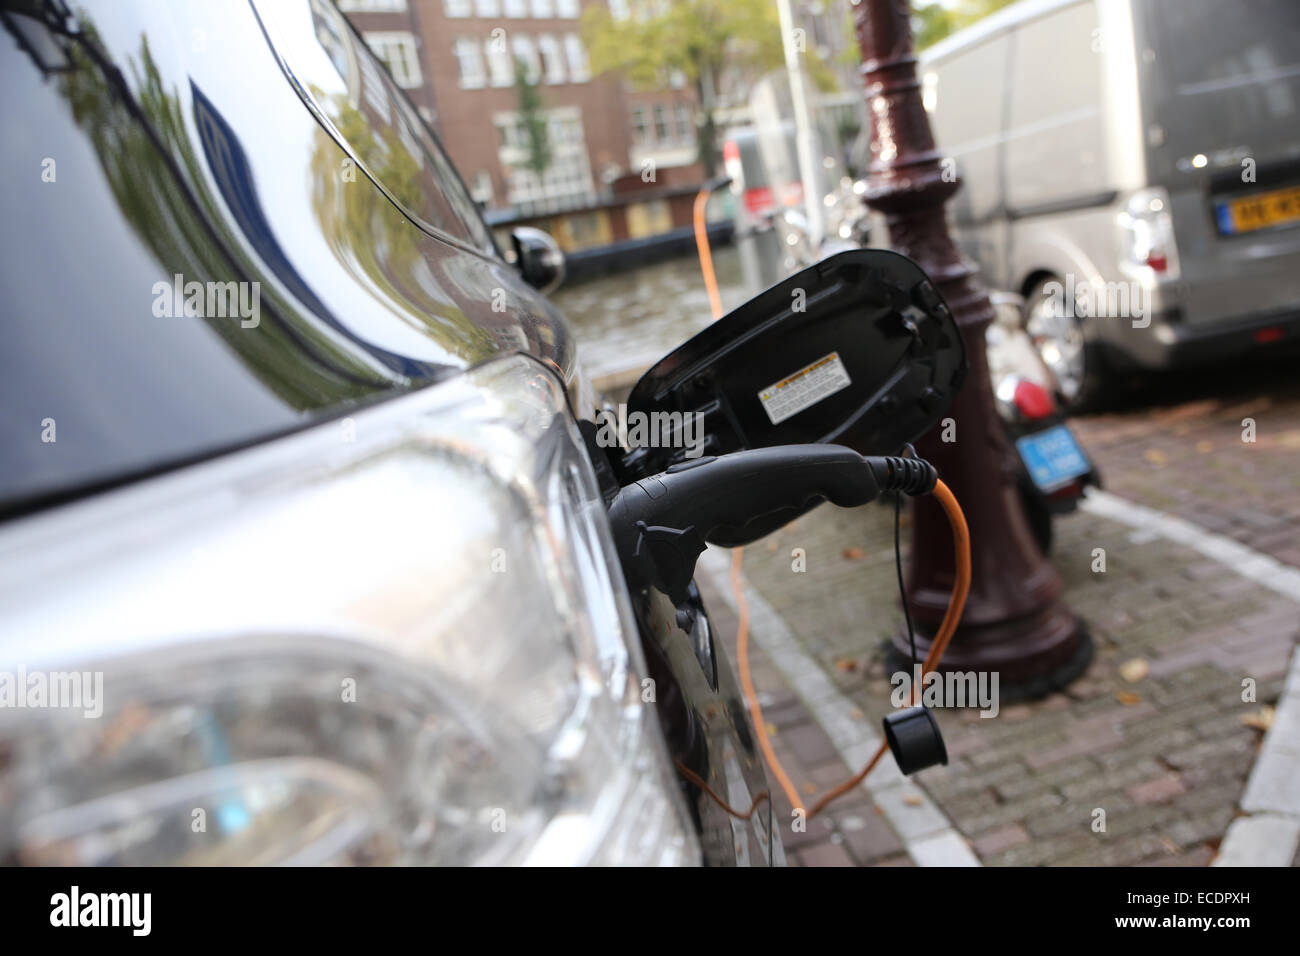 charging electric car outdoor europe Stock Photo